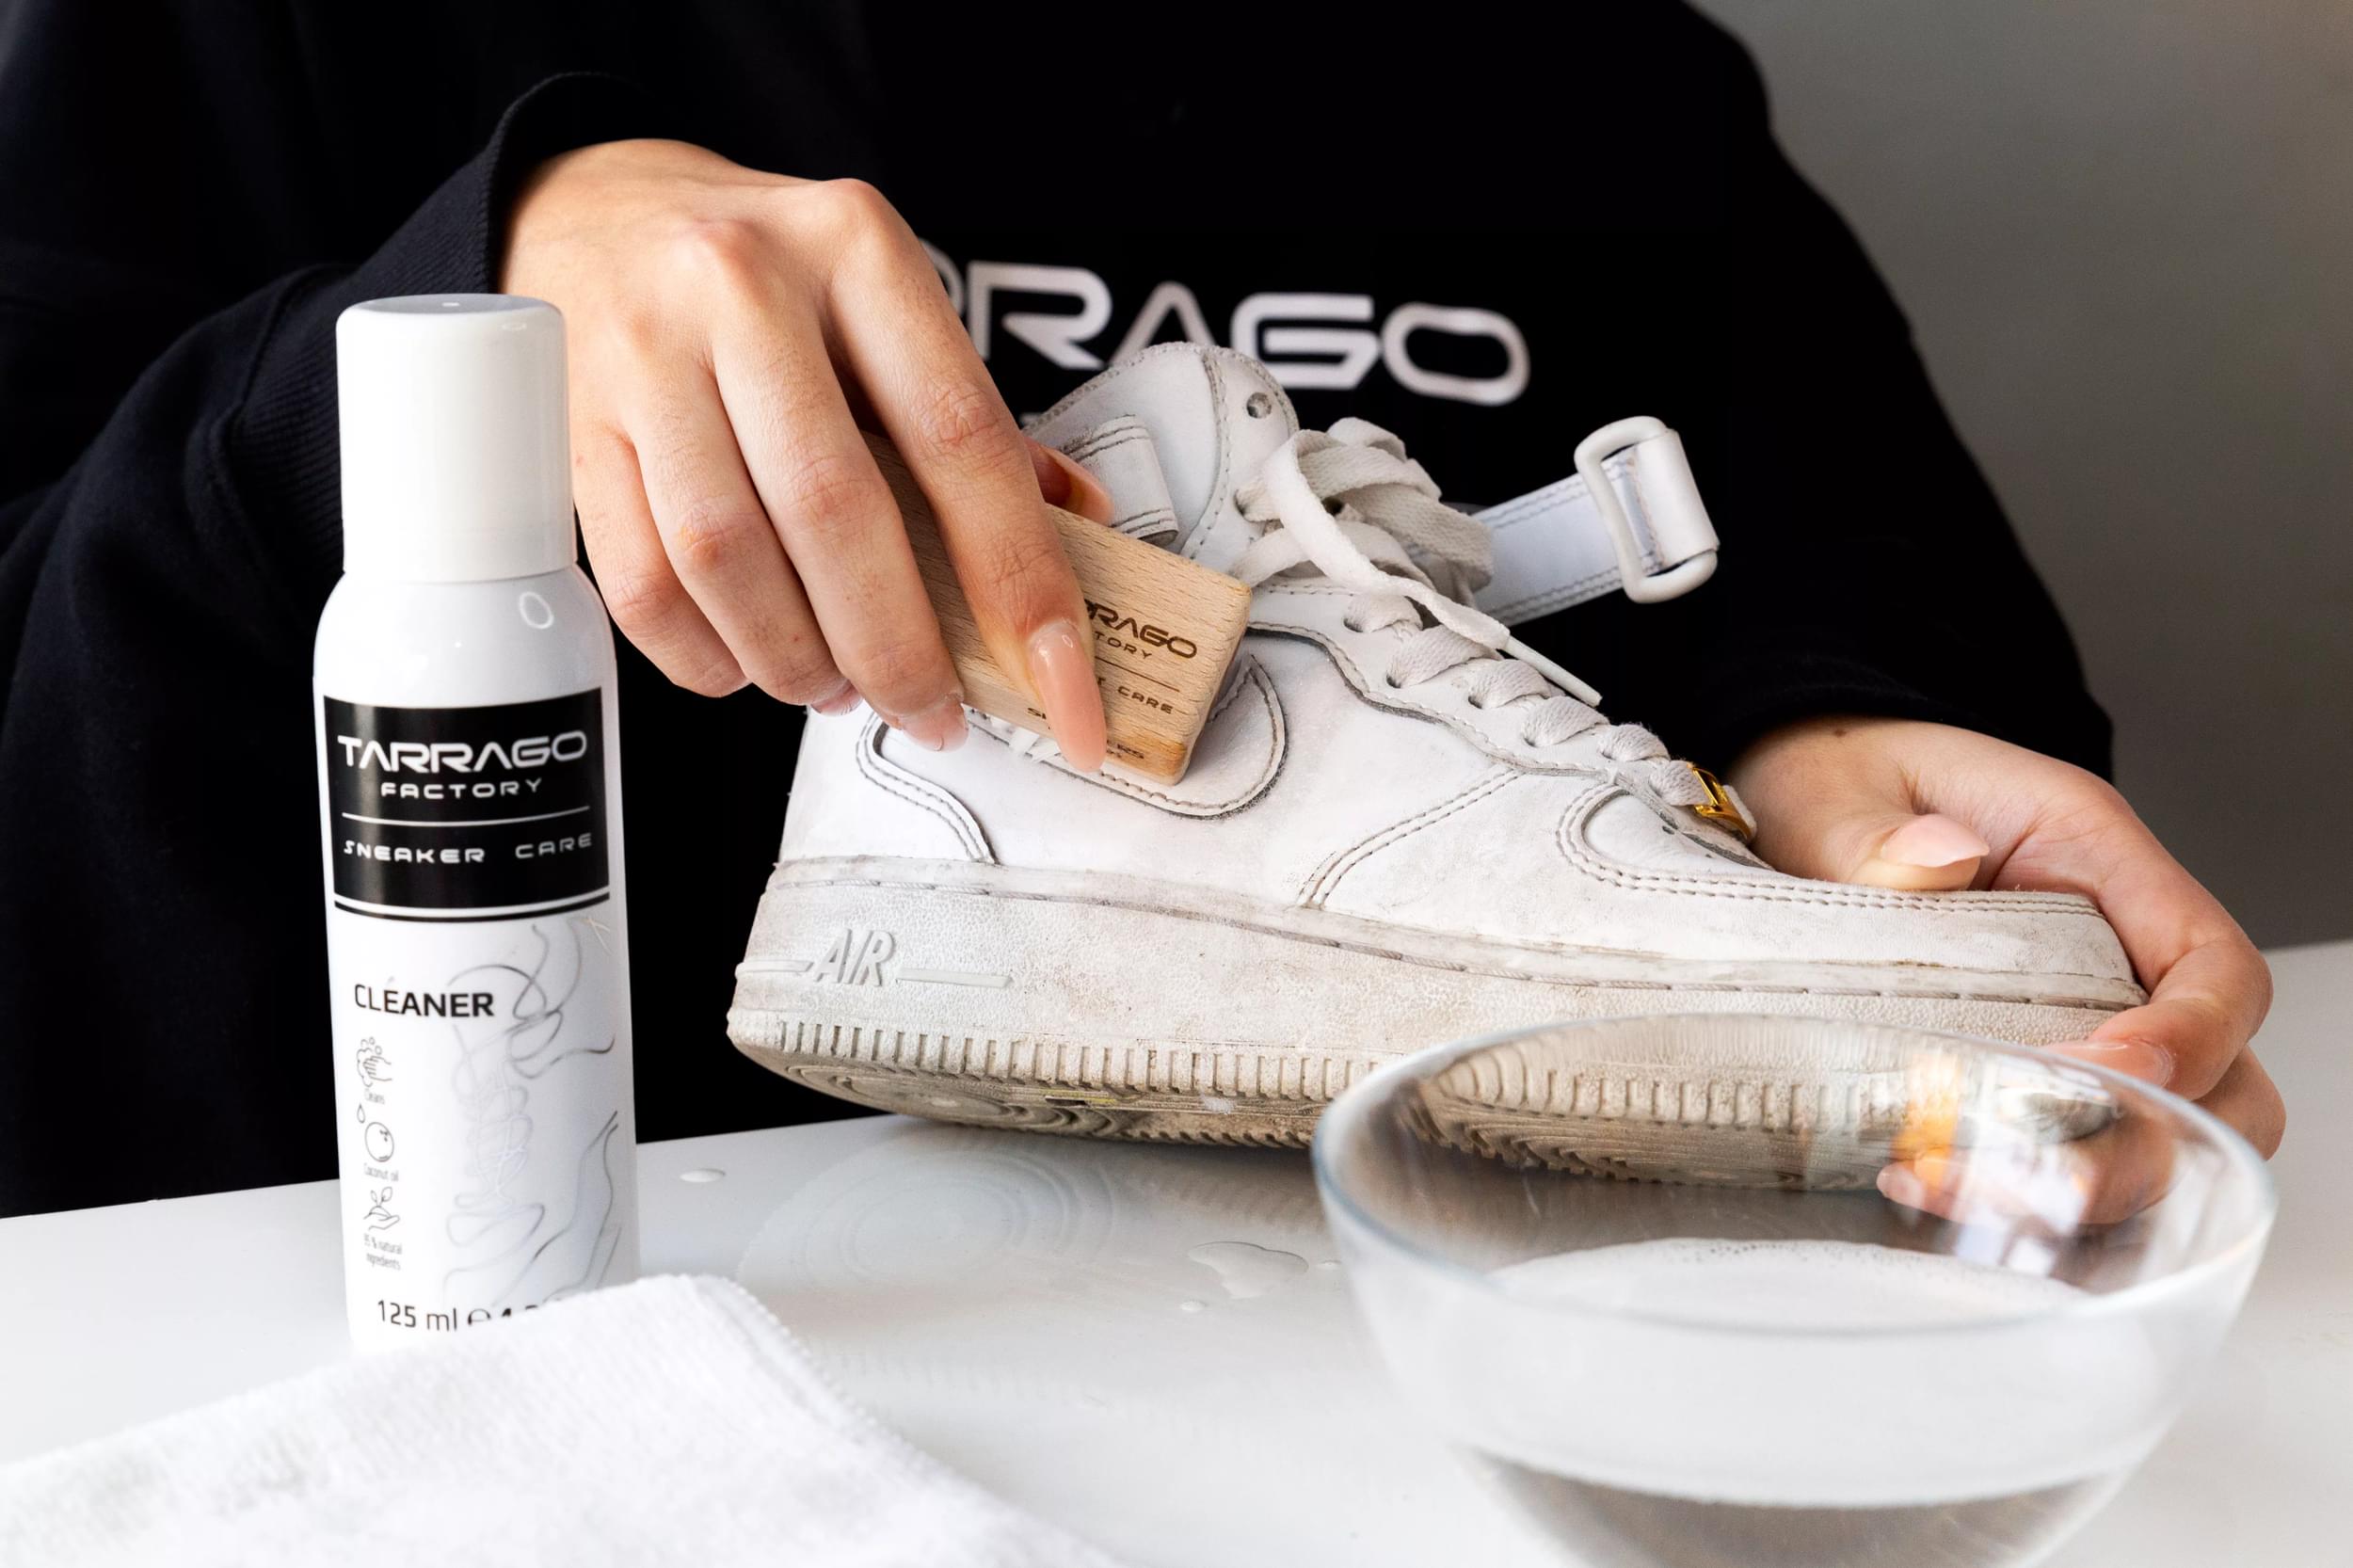 clean, repair and personalize your sneakers